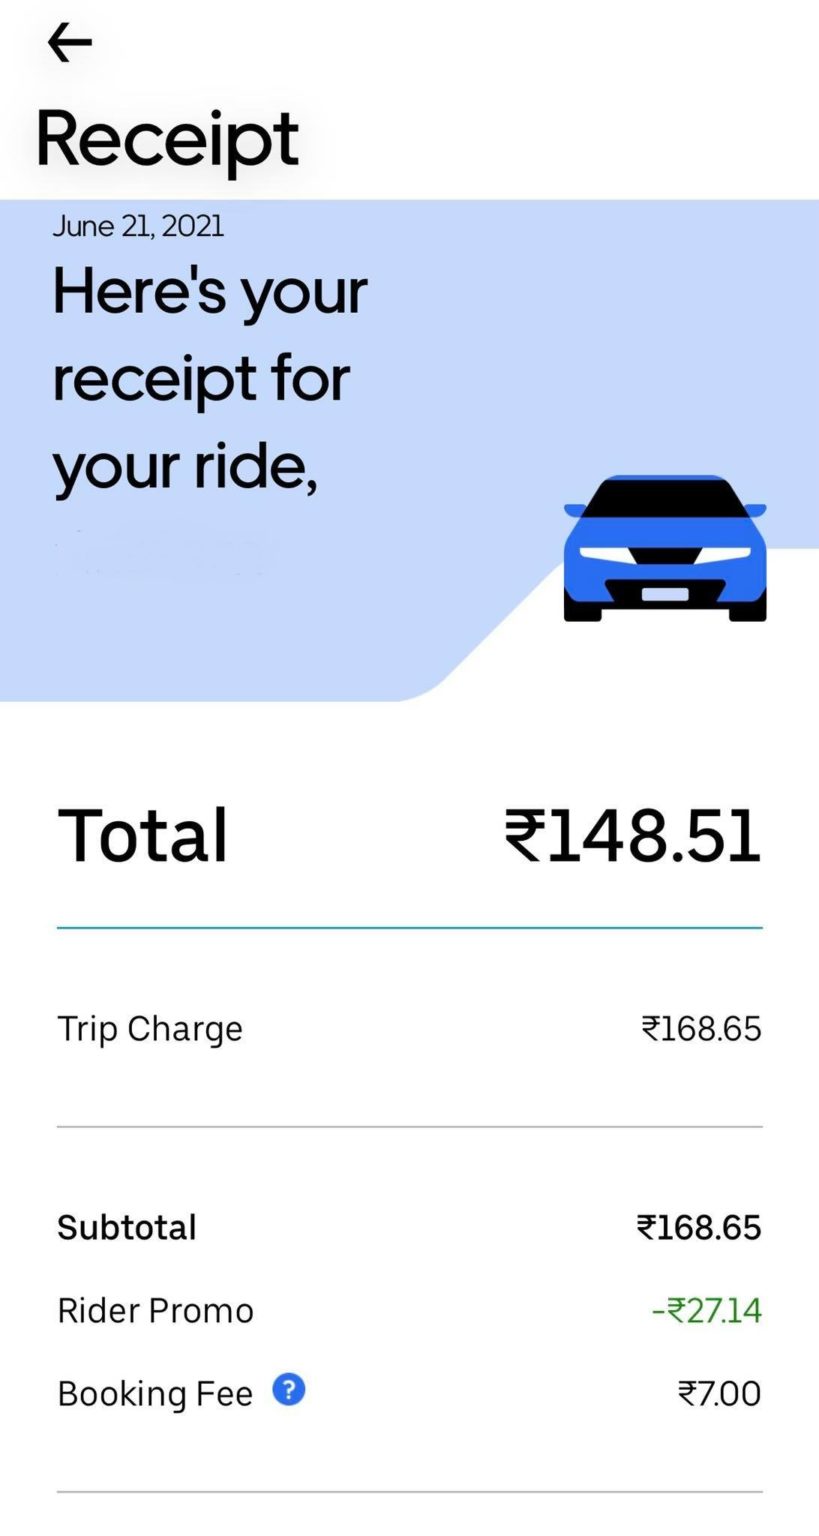 how-to-get-a-receipt-from-uber-step-by-step-guide